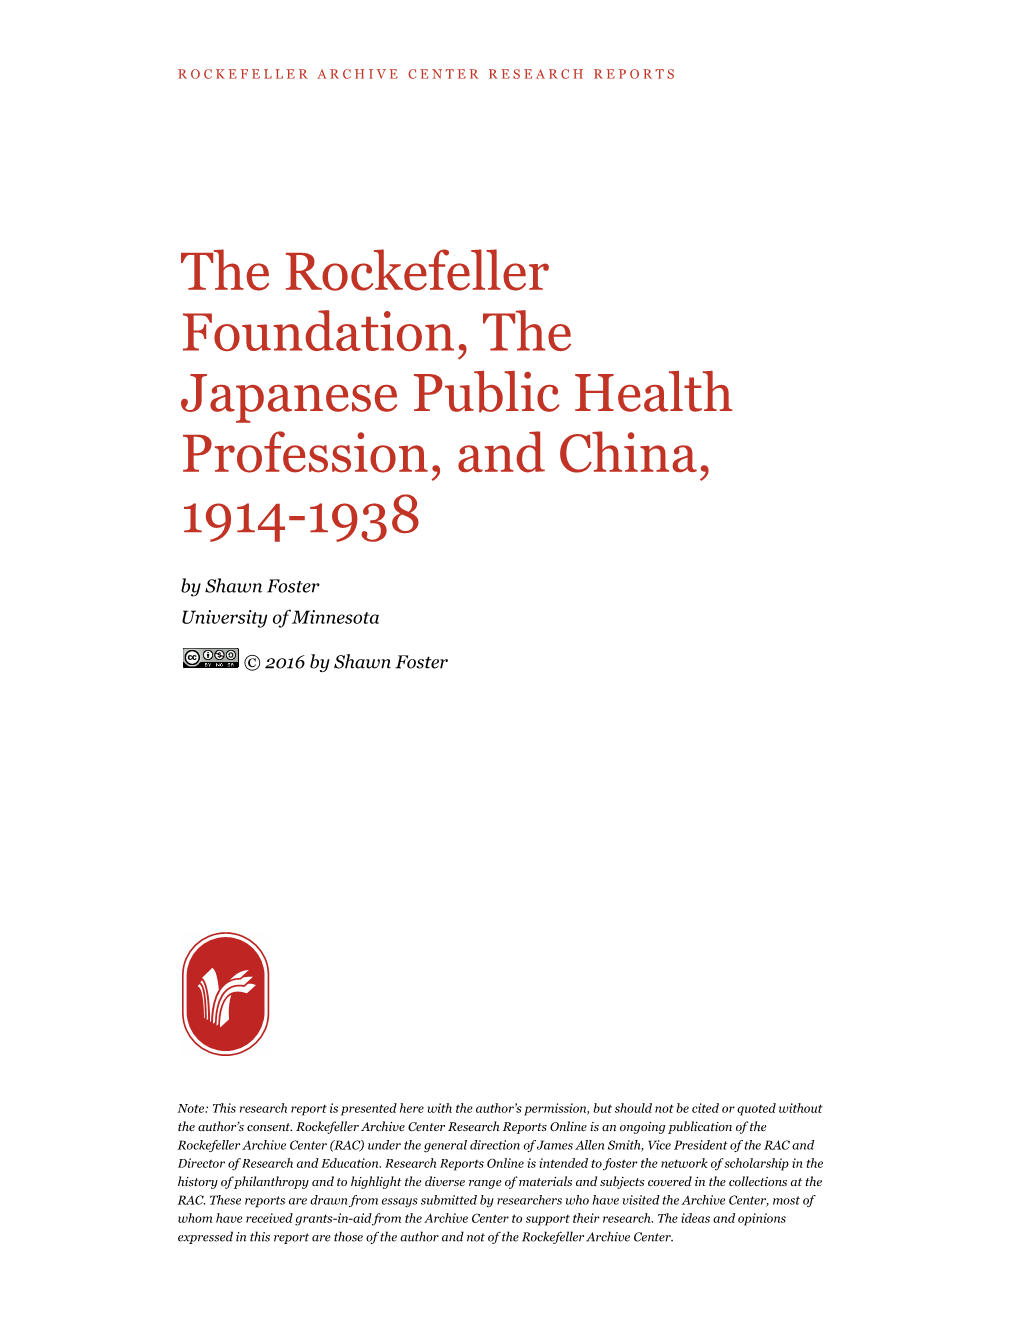 The Rockefeller Foundation, the Japanese Public Health Profession, and China, 1914-1938